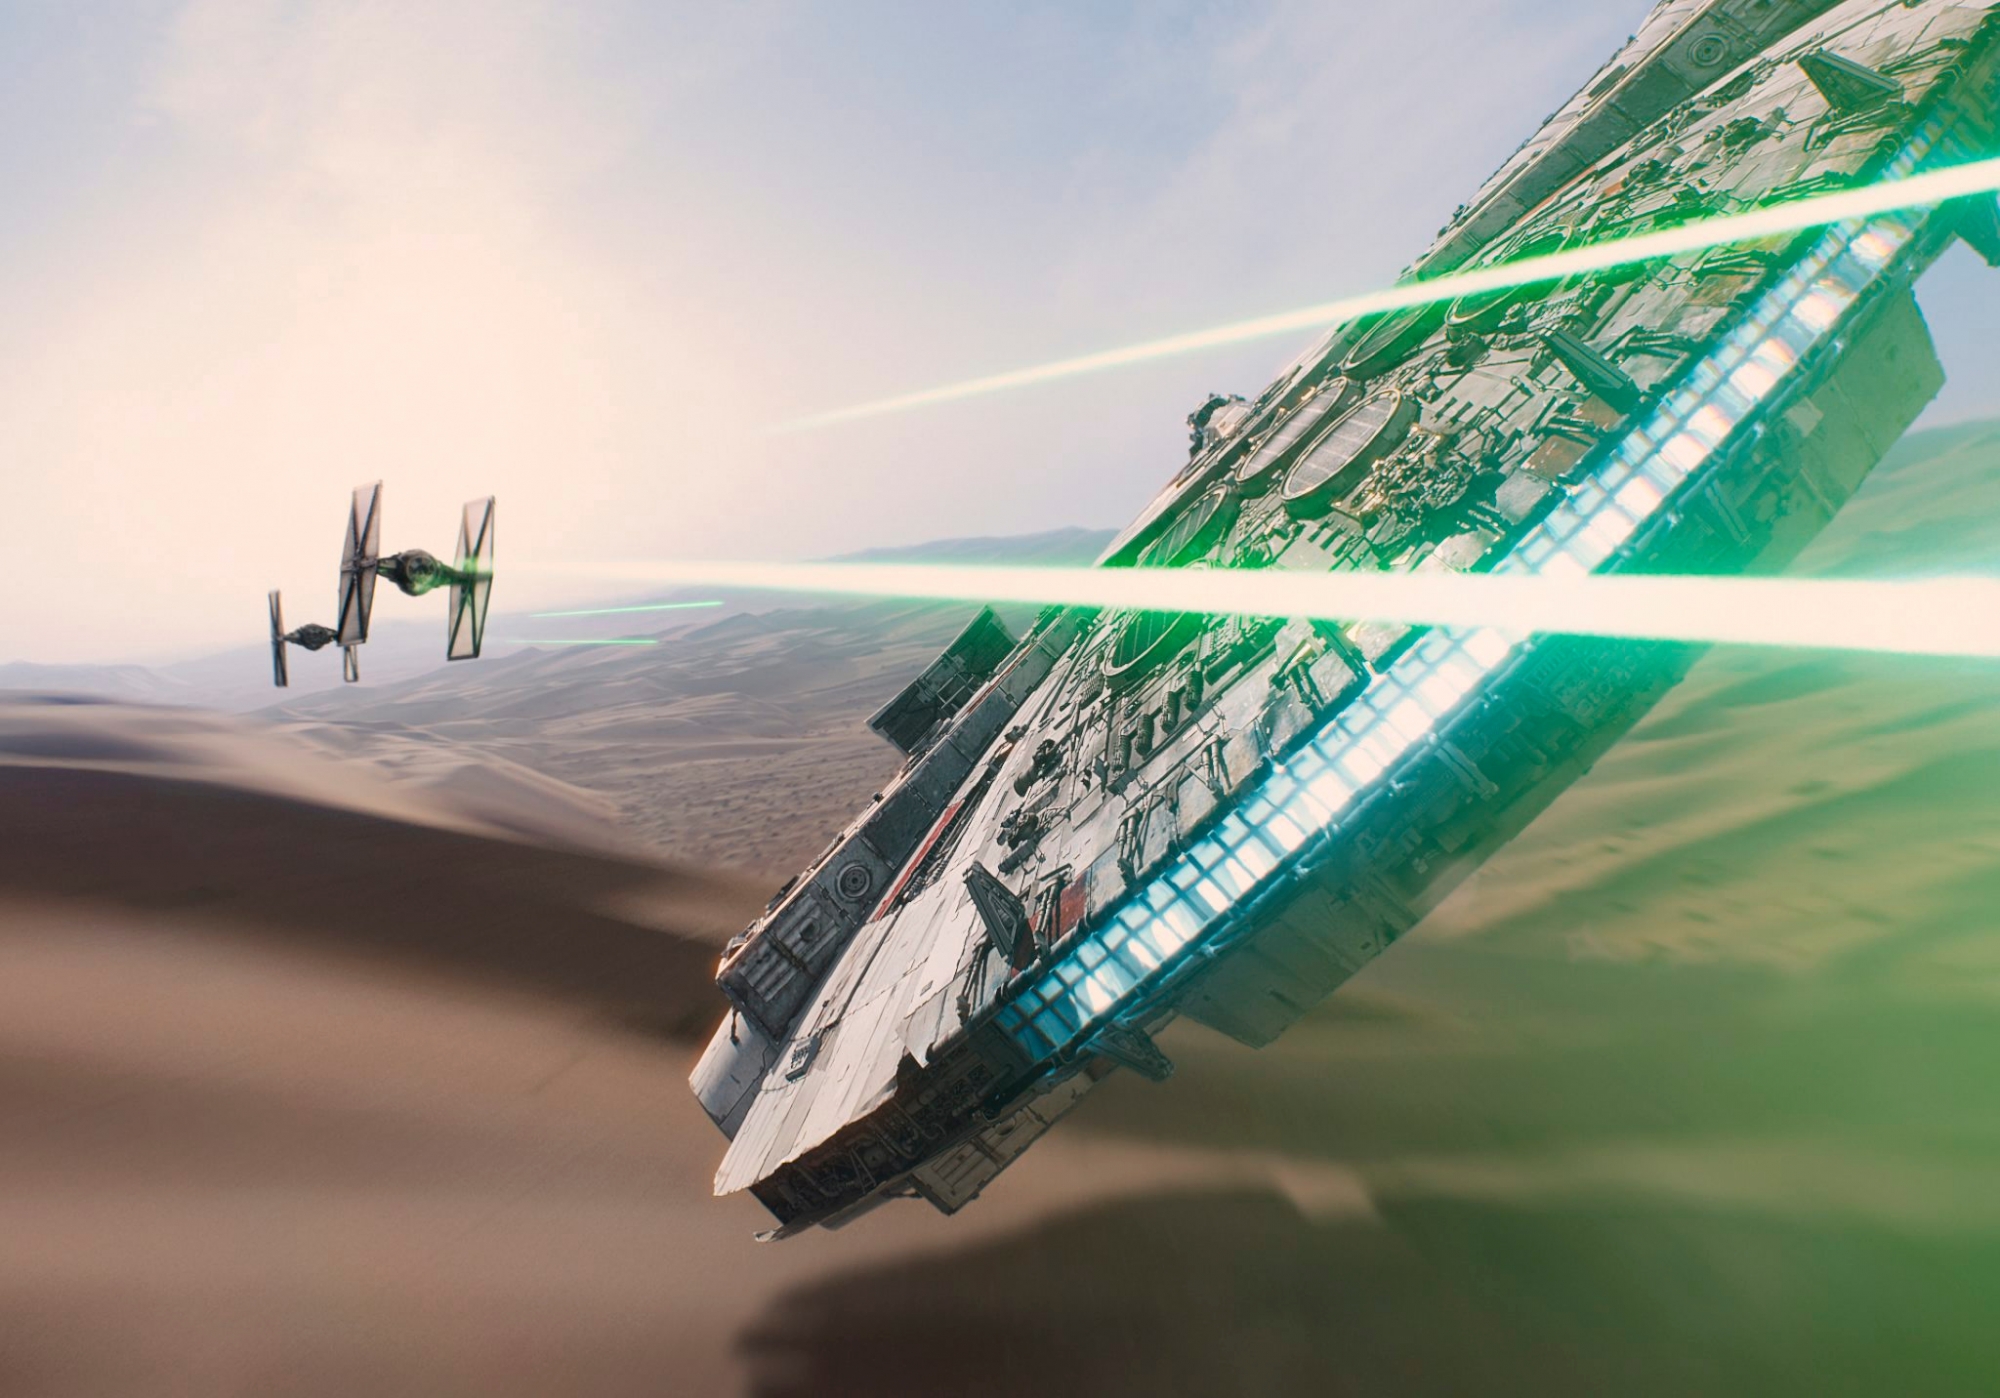 This photo provided by Disney/Lucasfilm shows a scene from the new film, "Star Wars: The Force Awakens." The movie releases in U.S. theaters on Dec. 18, 2015. (Film Frame/Disney/Lucasfilm via AP) Star Wars-Box Office